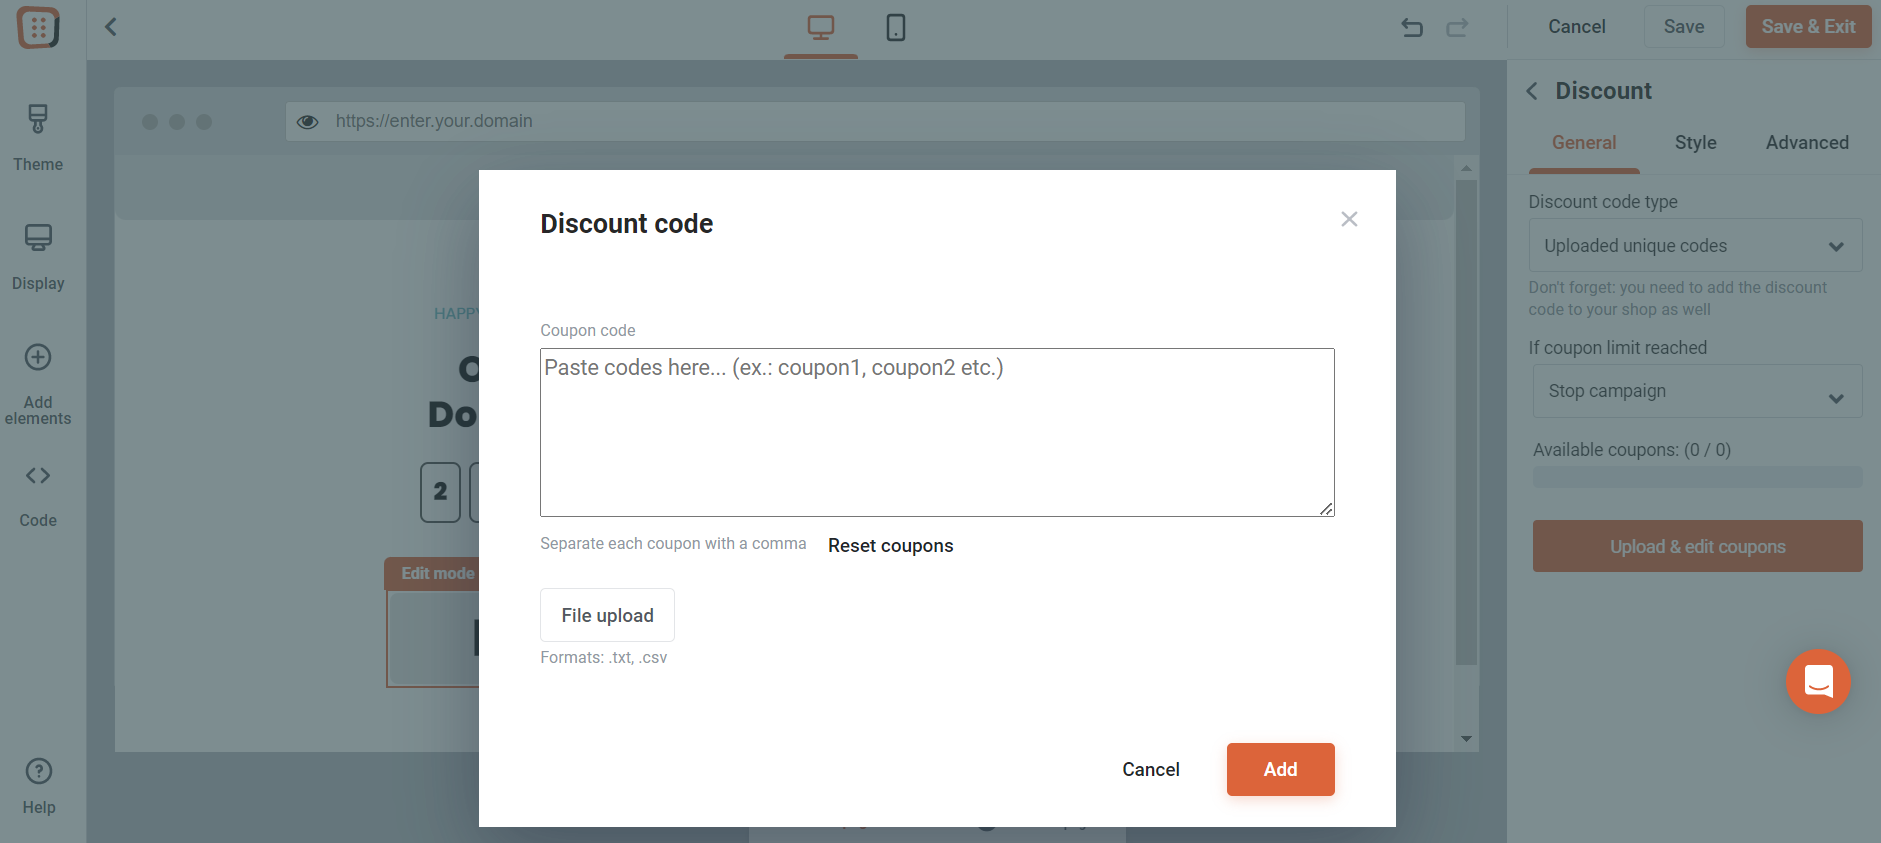 How_to_use_Discount_Codes_in_Embedded_Content_10.png